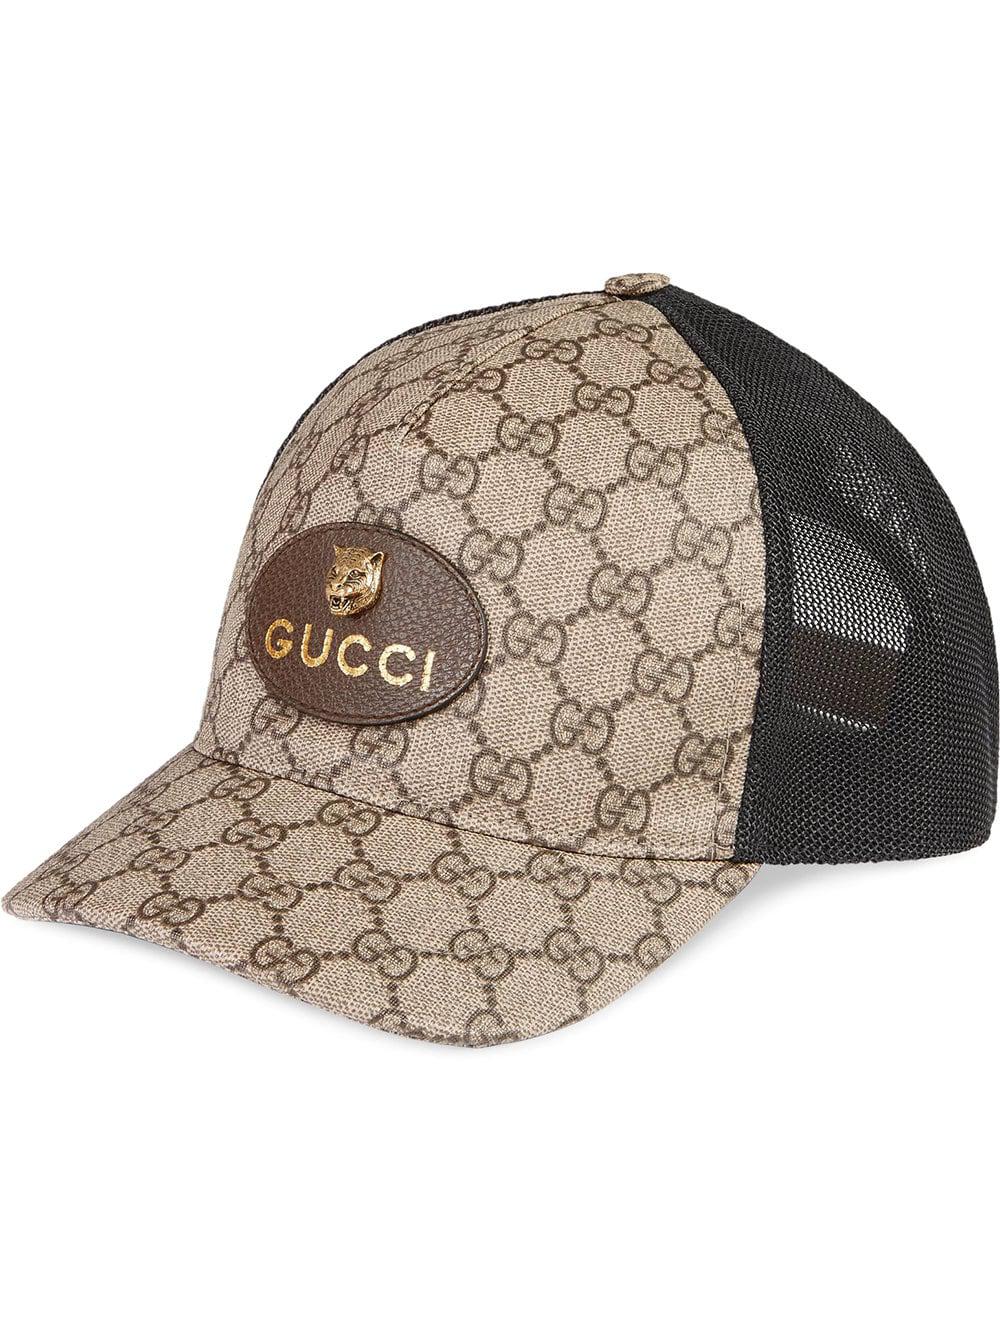 Gucci Leather Gg Supreme Baseball Hat in Brown - Lyst